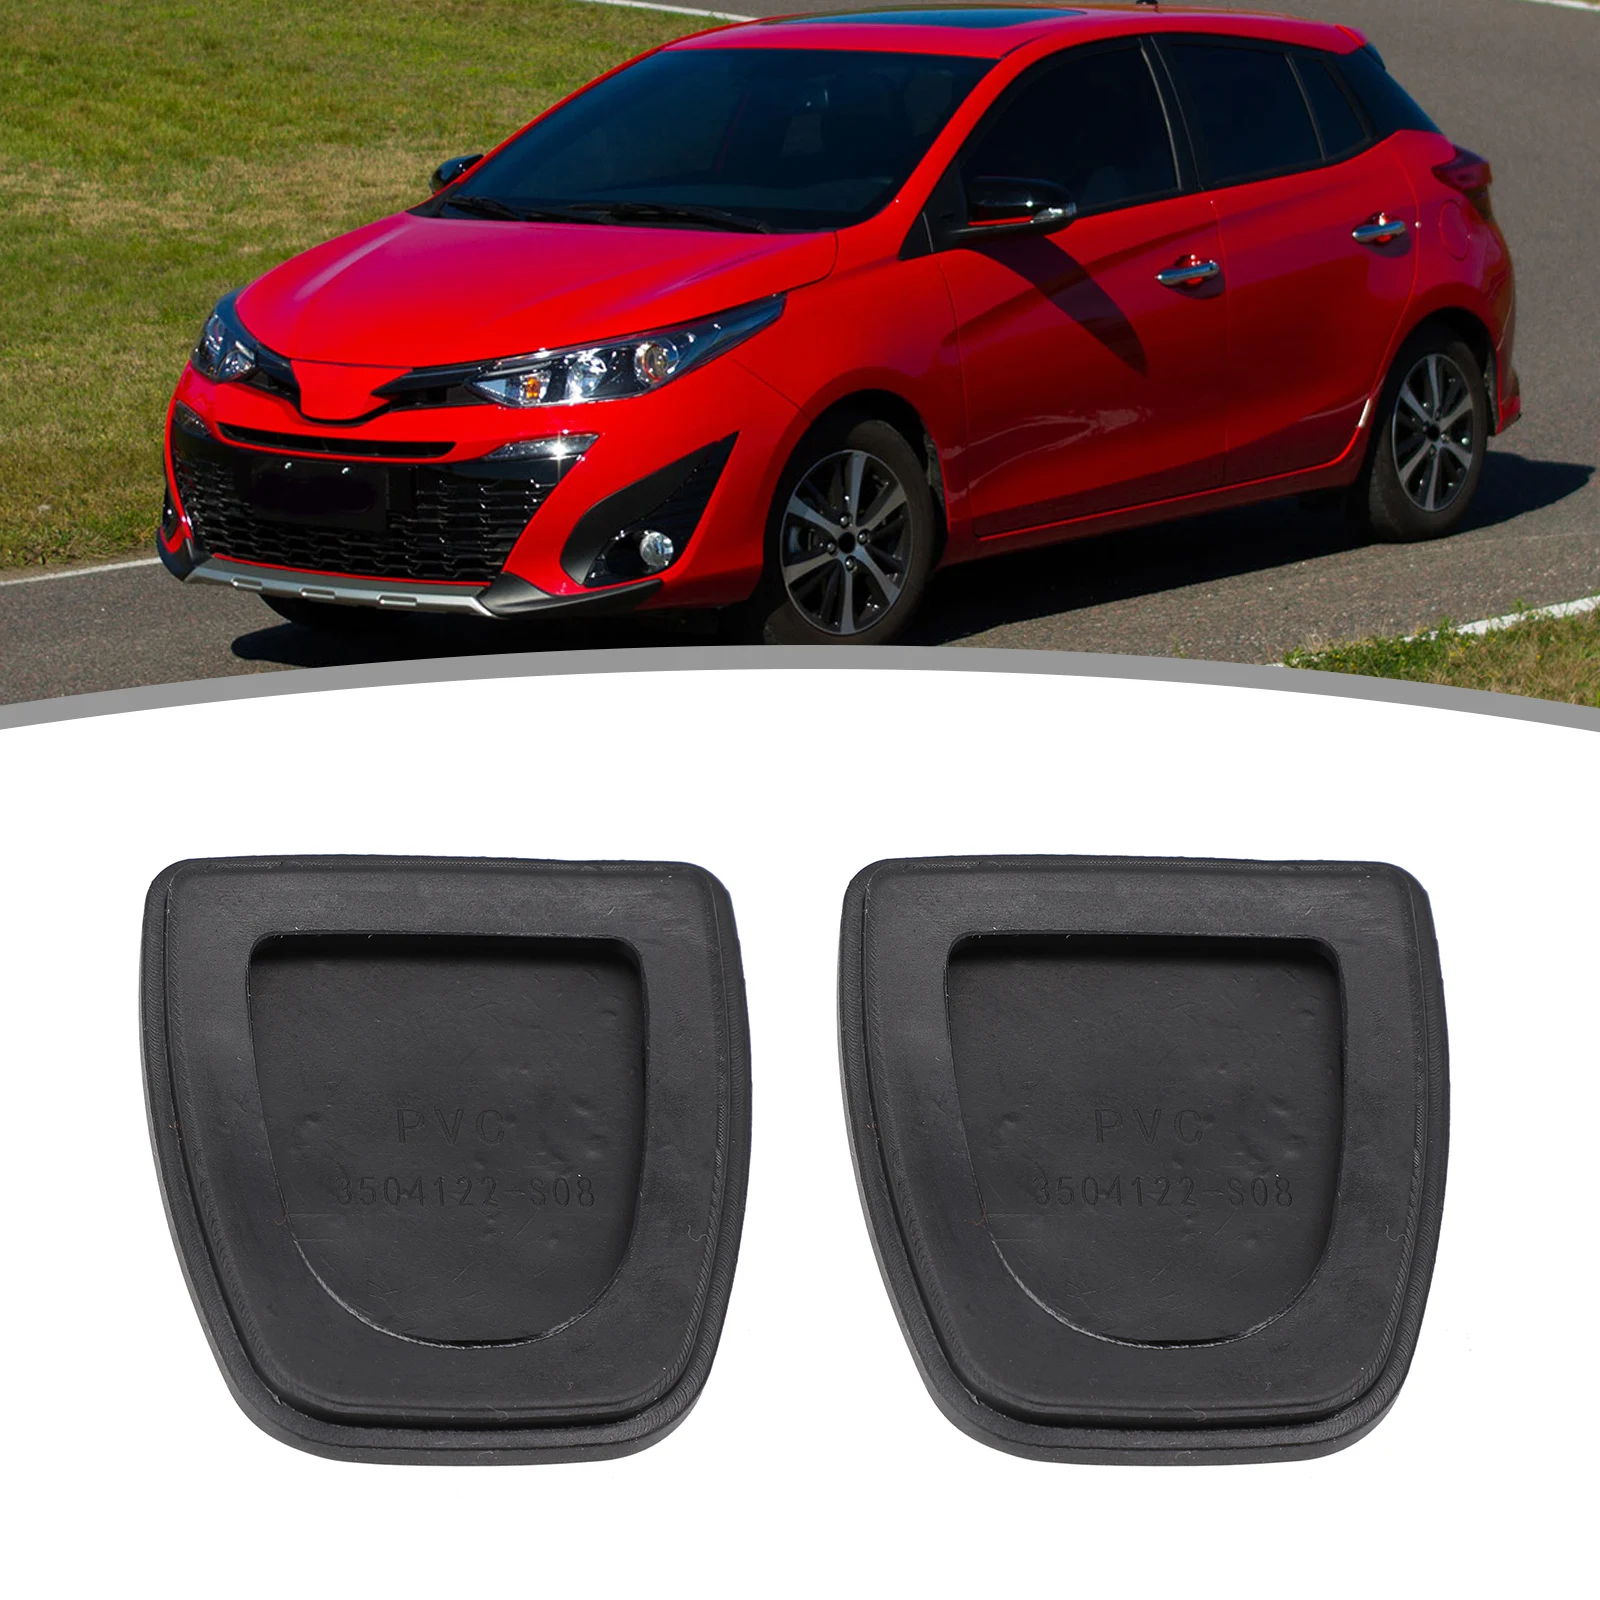 

Rubber Covers Brake Clutch Car Accessories For RAV4 2001-2005 For Yaris Sedan Manual Transmission Only 31321-52010